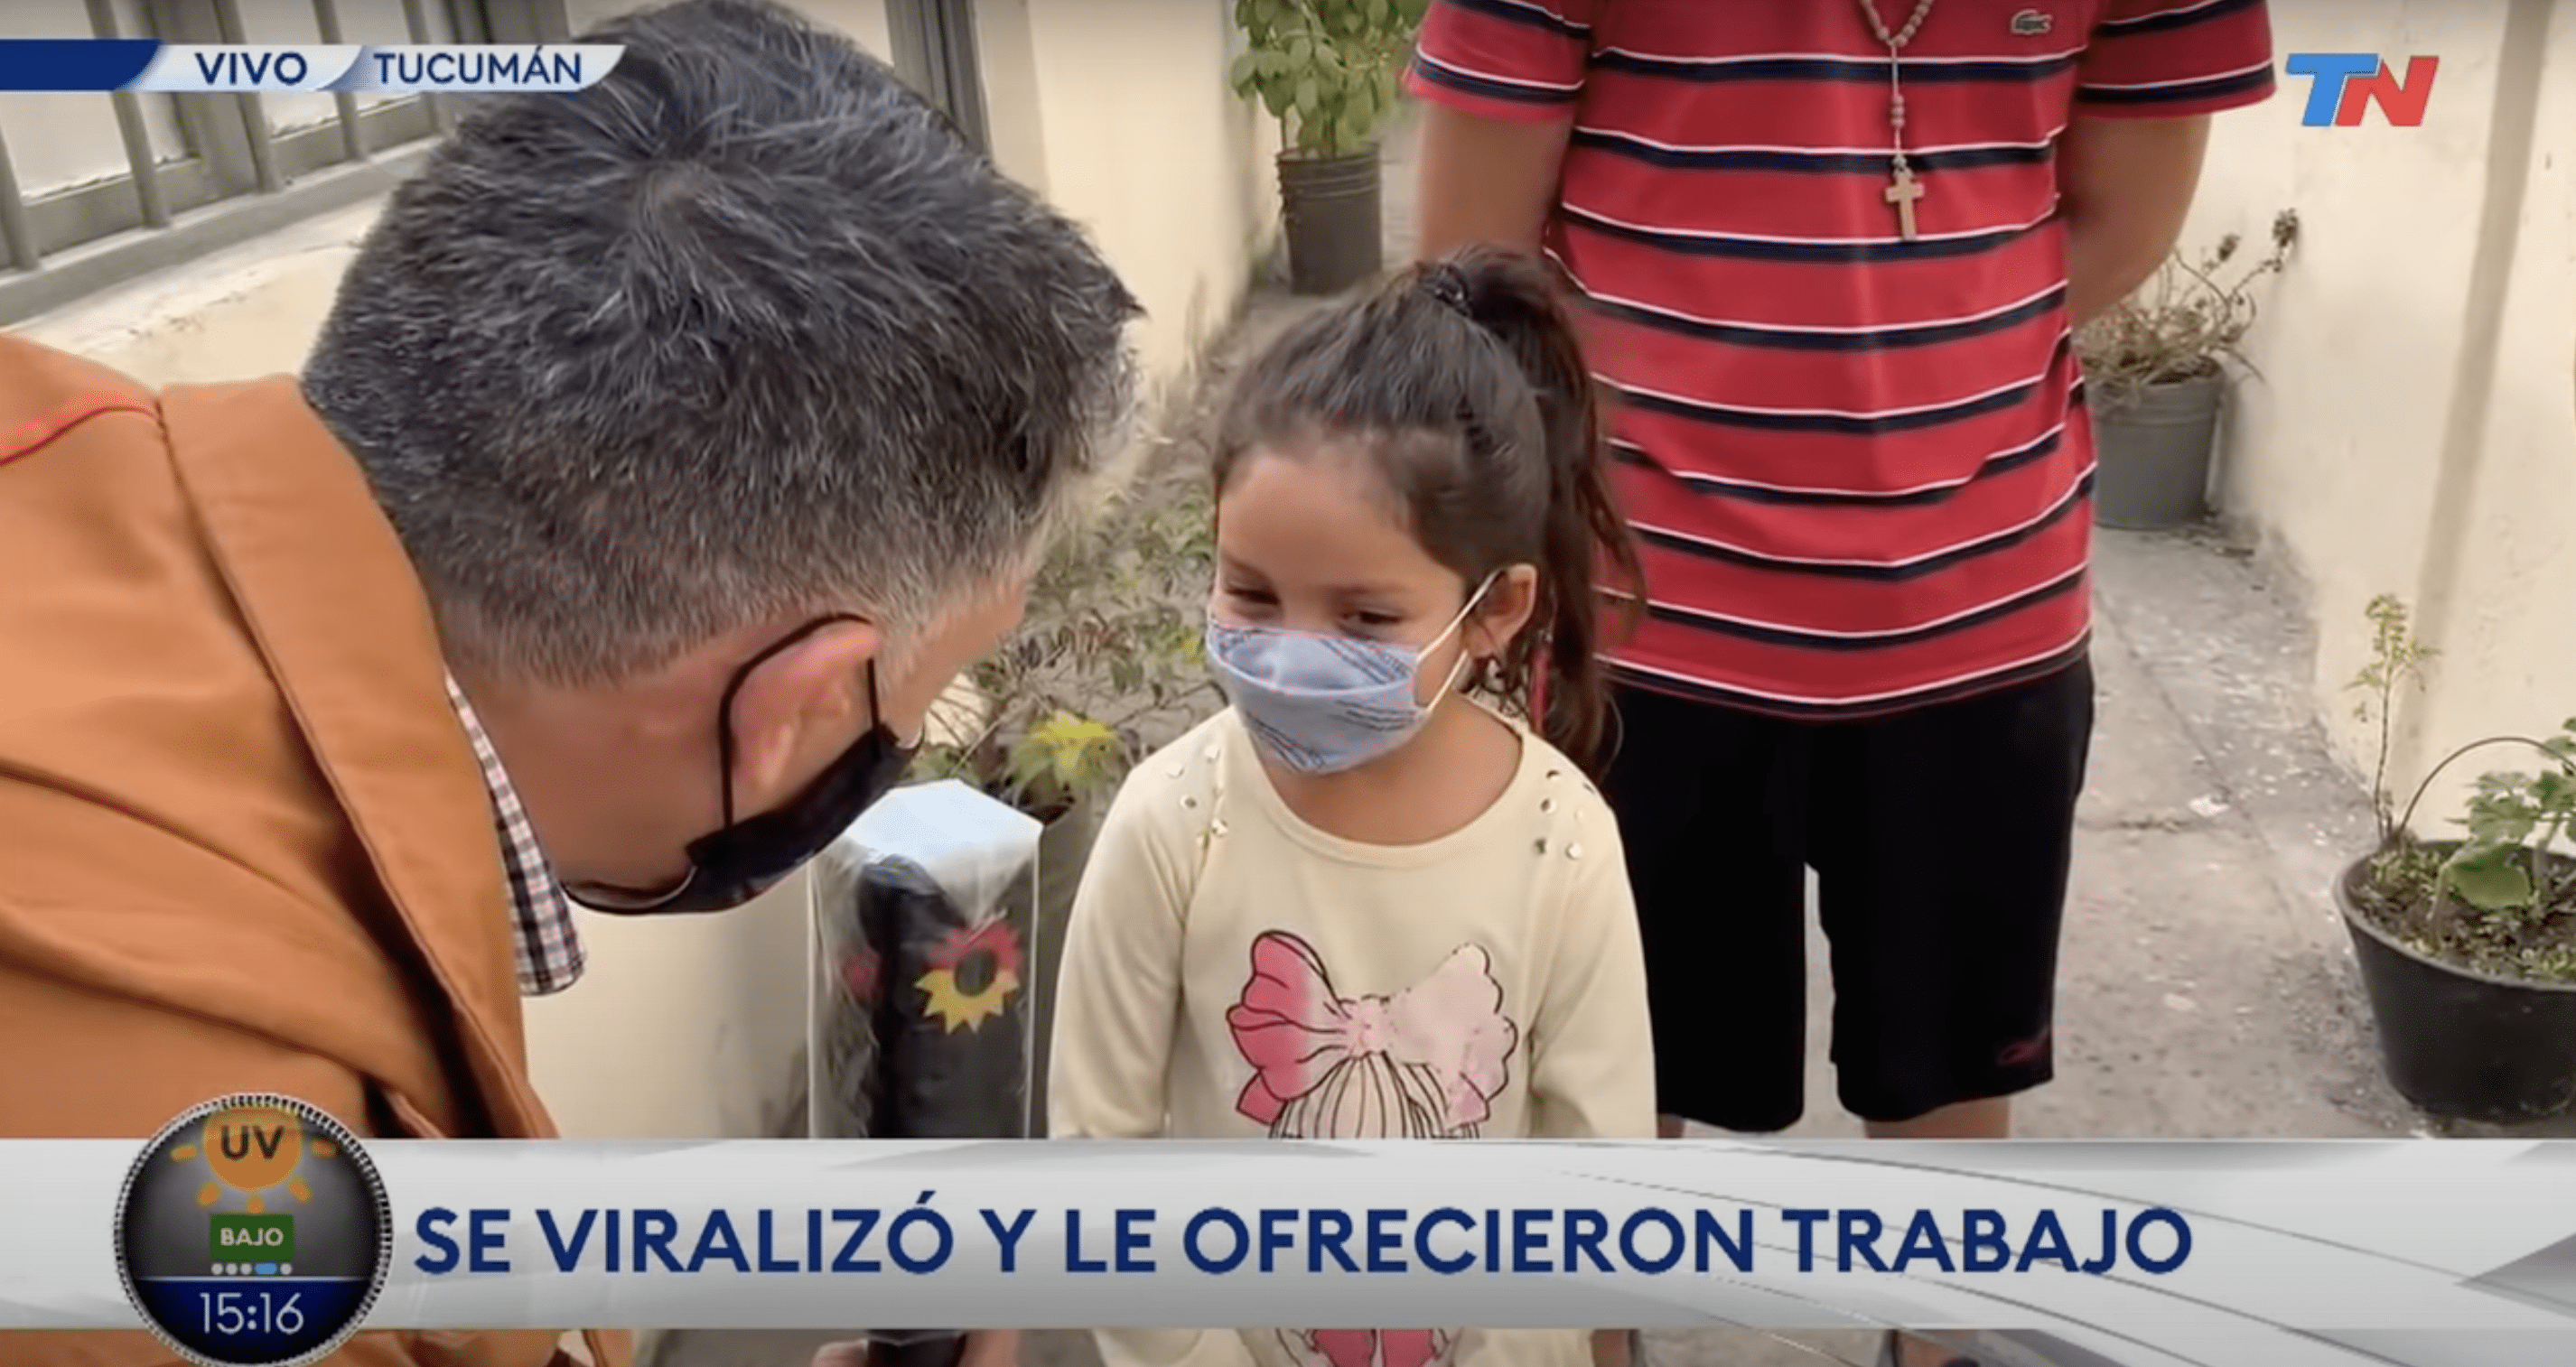 A reporter talks to little girl, Guadalupe | Source: YouTube.com/Todo Noticias